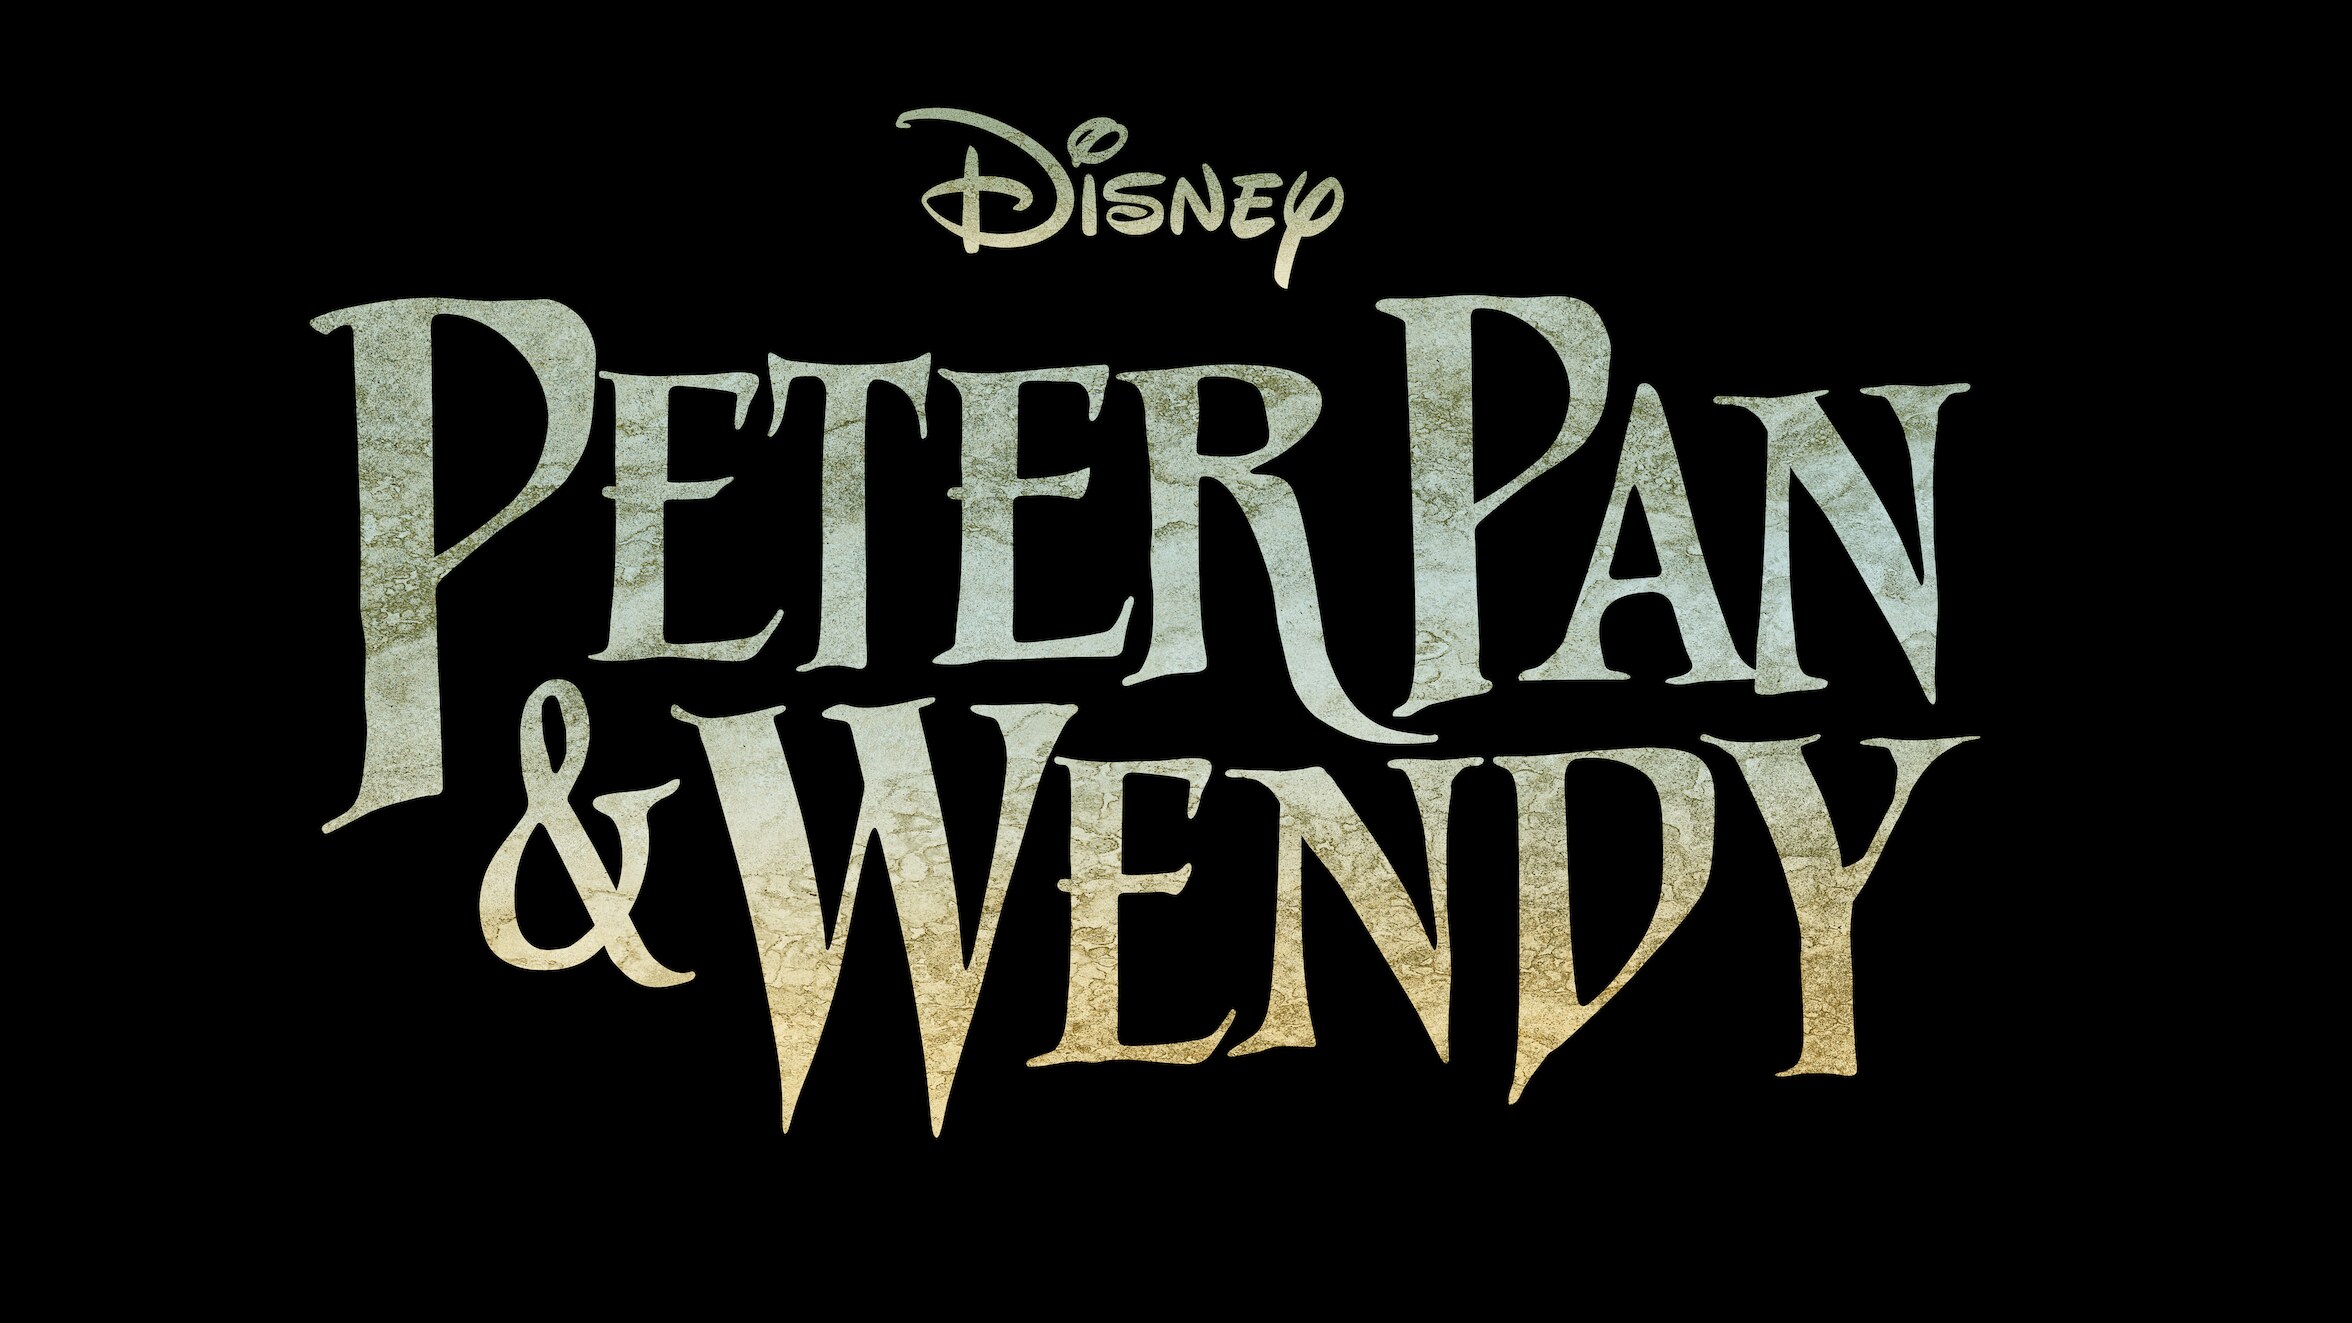 NEW TRAILER FOR DISNEY’S EPIC MOVIE EVENT “PETER PAN & WENDY” AVAILABLE NOW